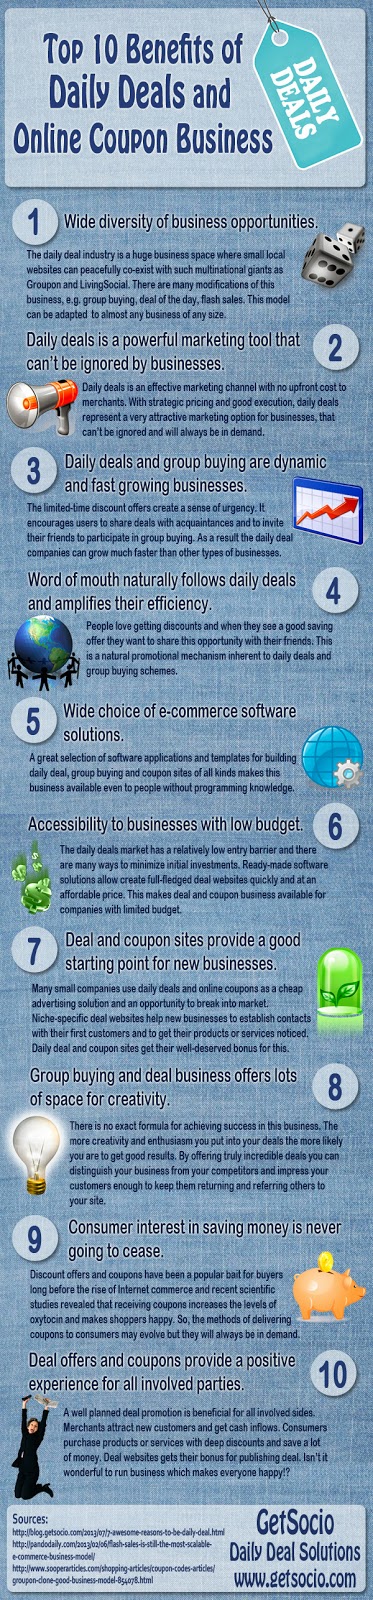 benefits of daily deals and online coupon business - Infographic